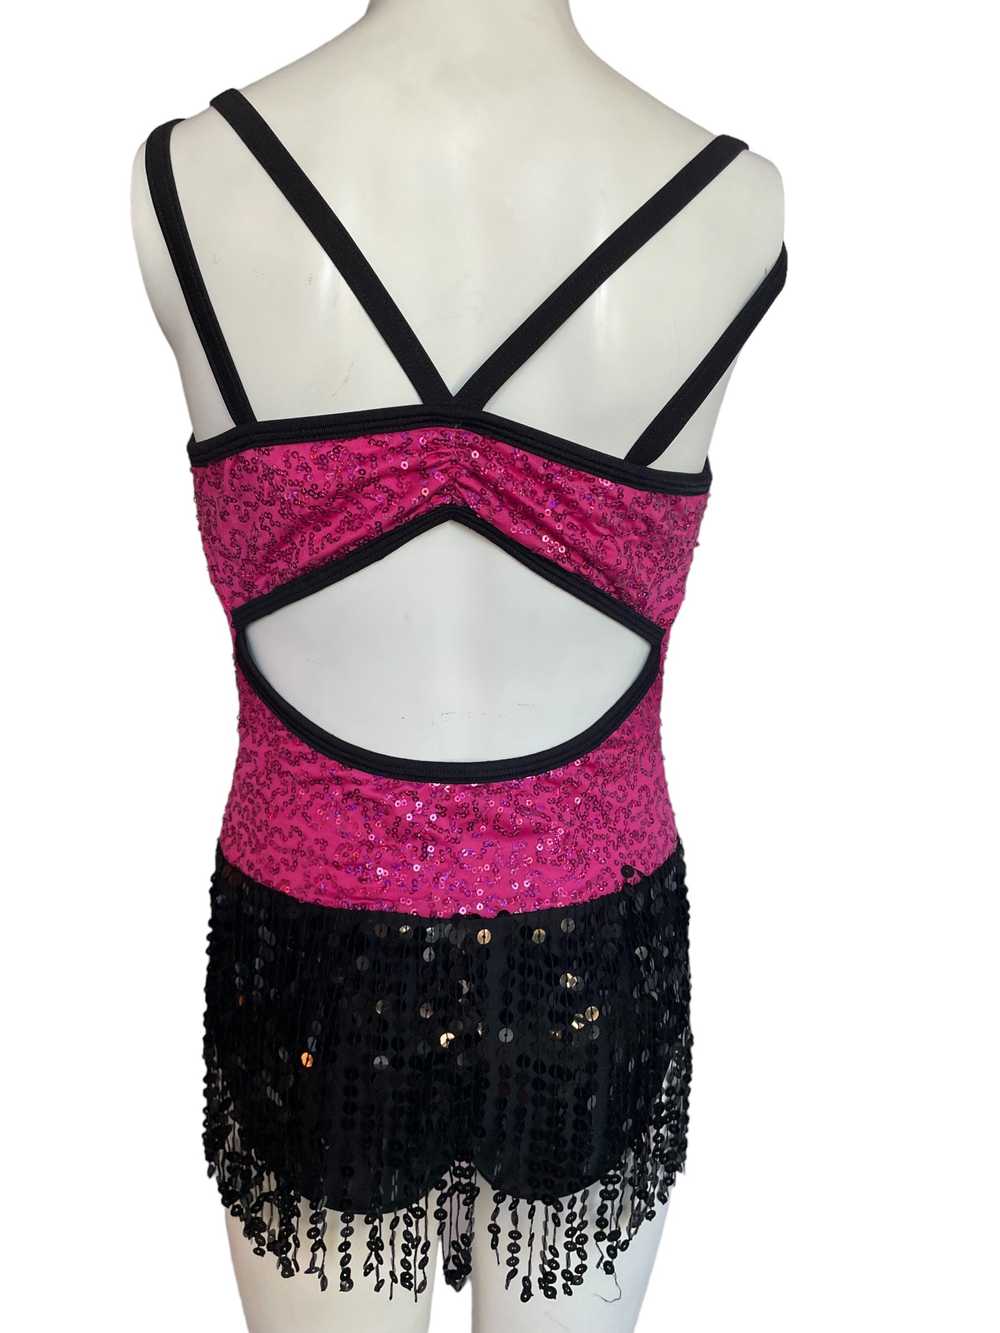 Dance costume - SPICE UP YOUR LIFE - image 3